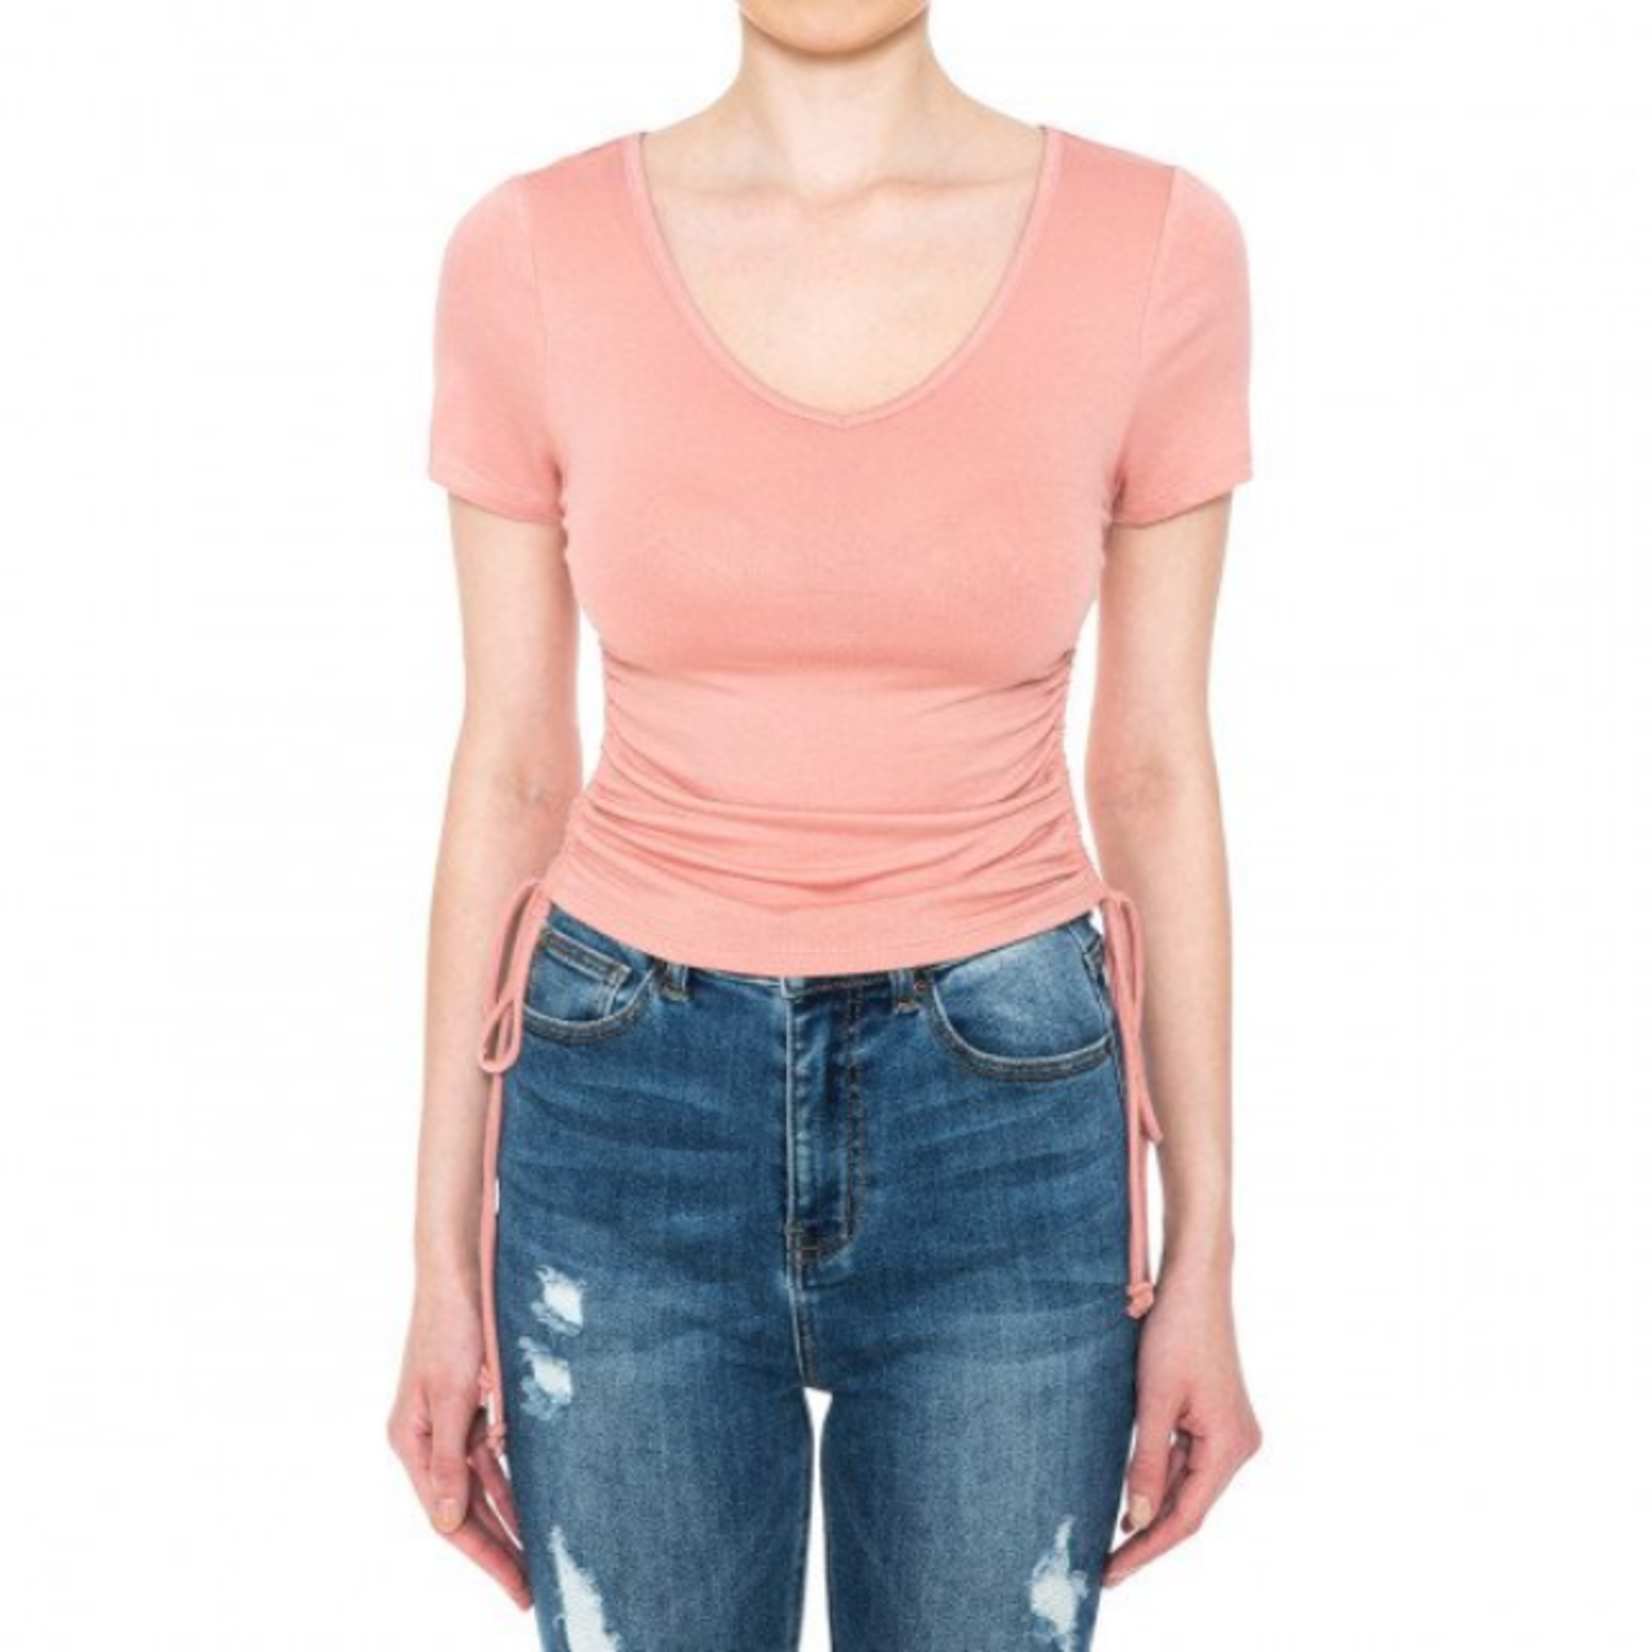 Ambiance Apparel Ambiance - Women's Ruch Side Crop Top - 73434